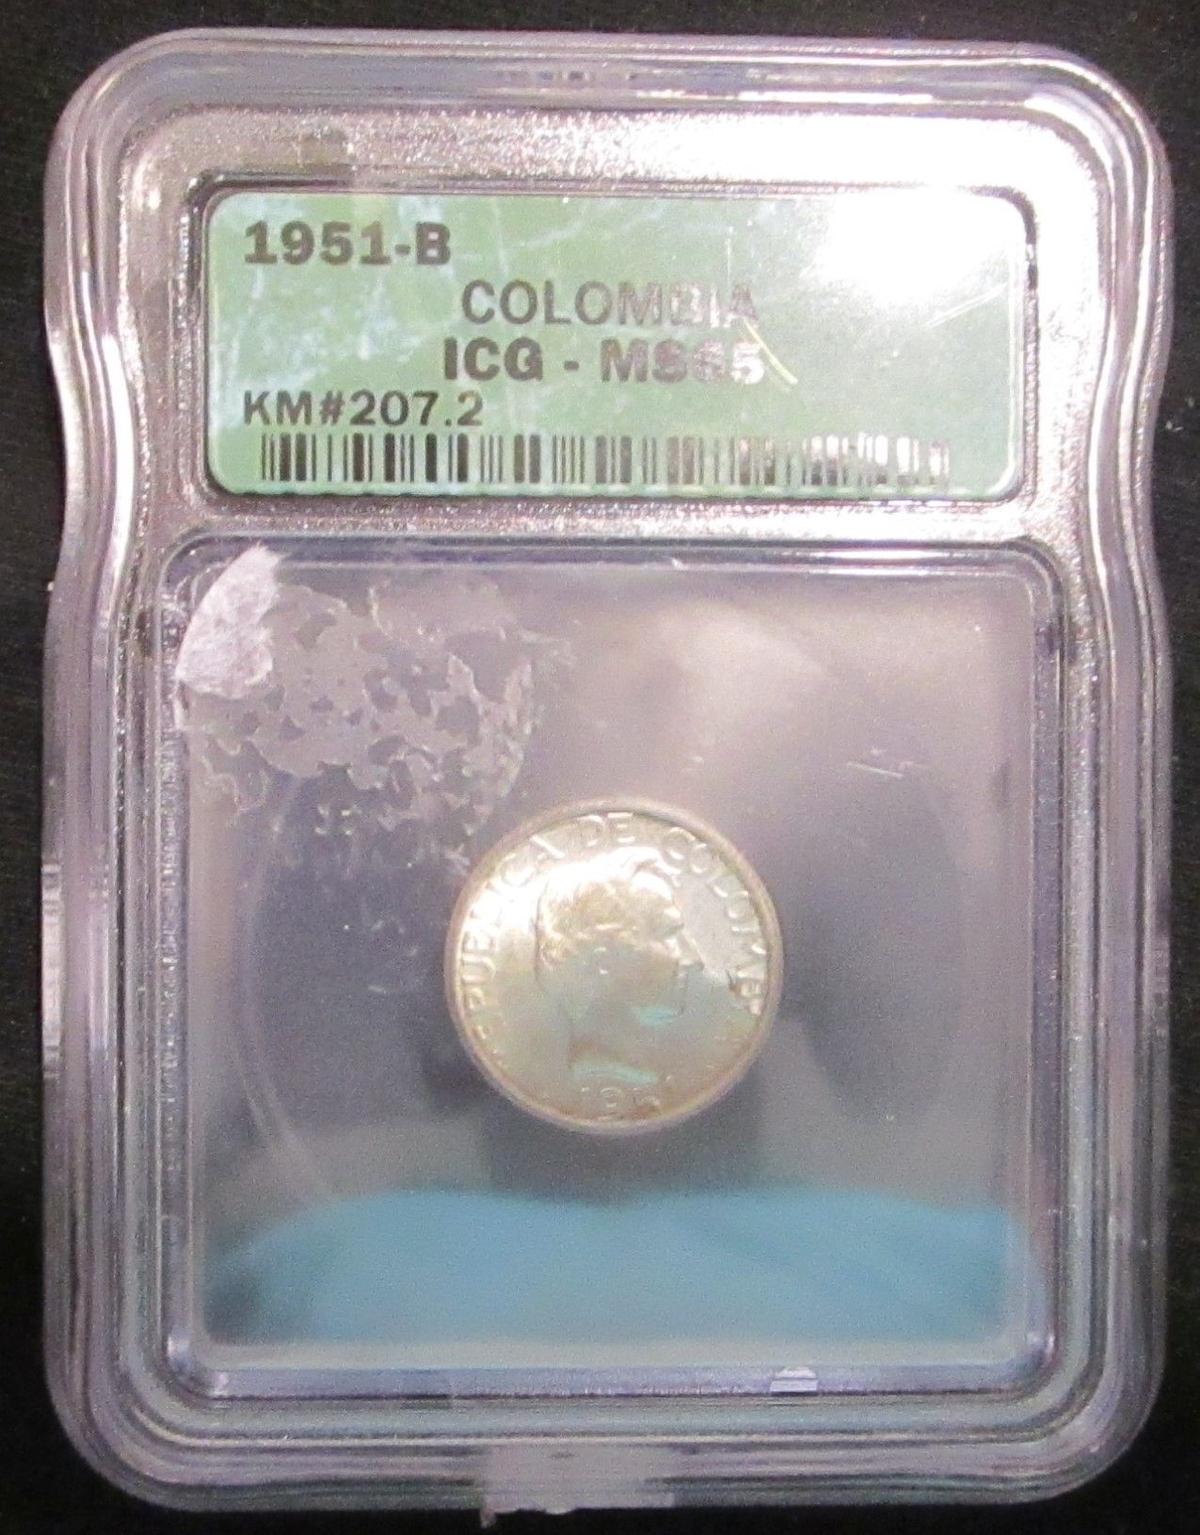 1951-B Colombia - 10 Centavos - Graded by ICG - ms 65